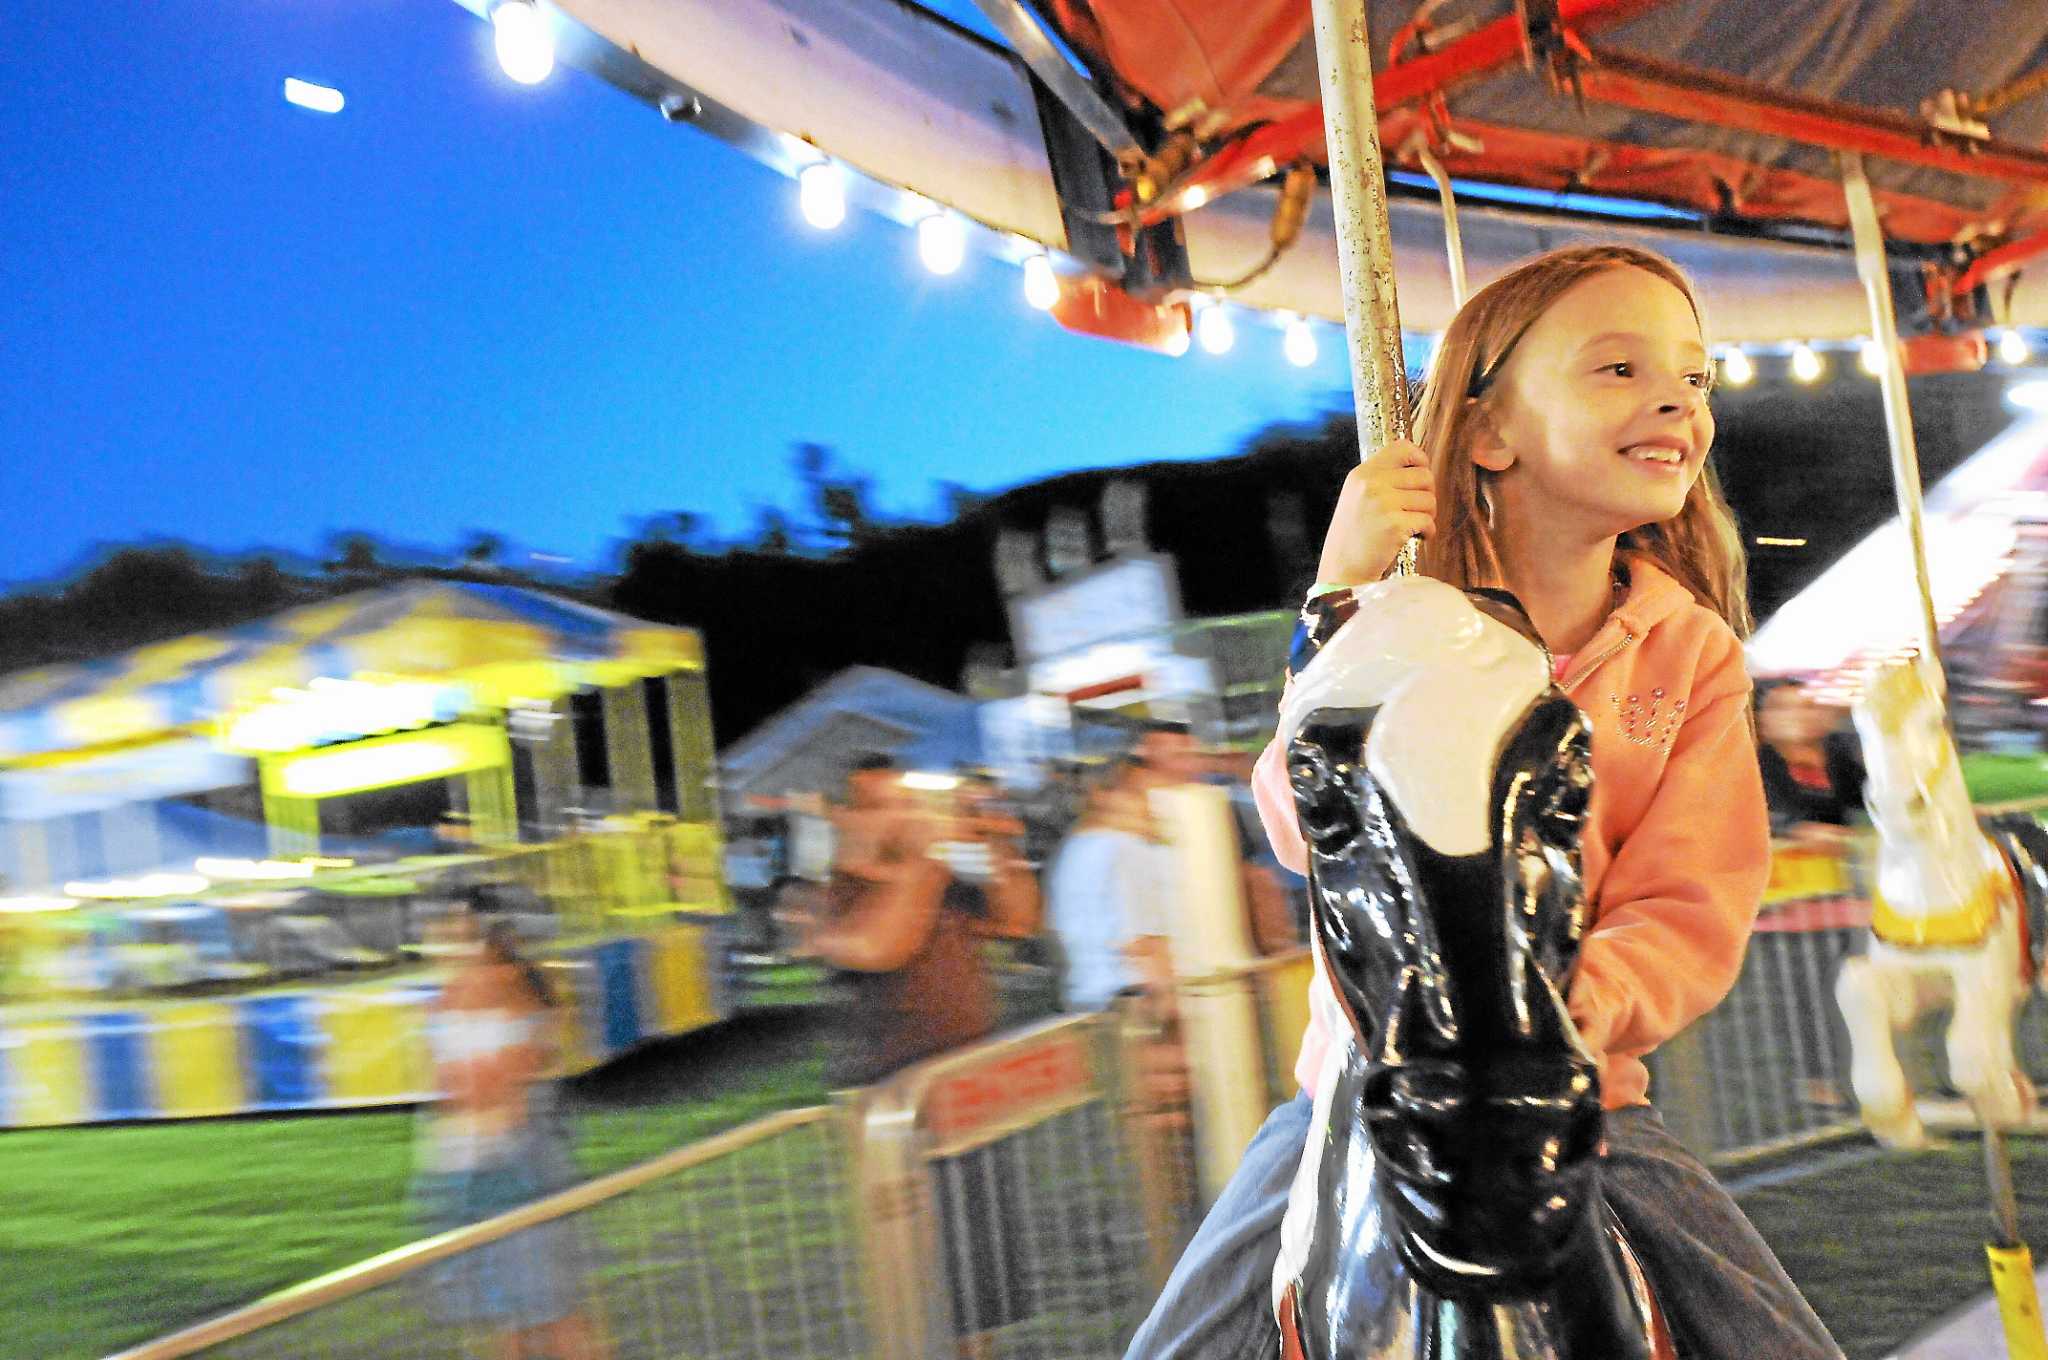 Winsted Fireman's Carnival starts Wednesday